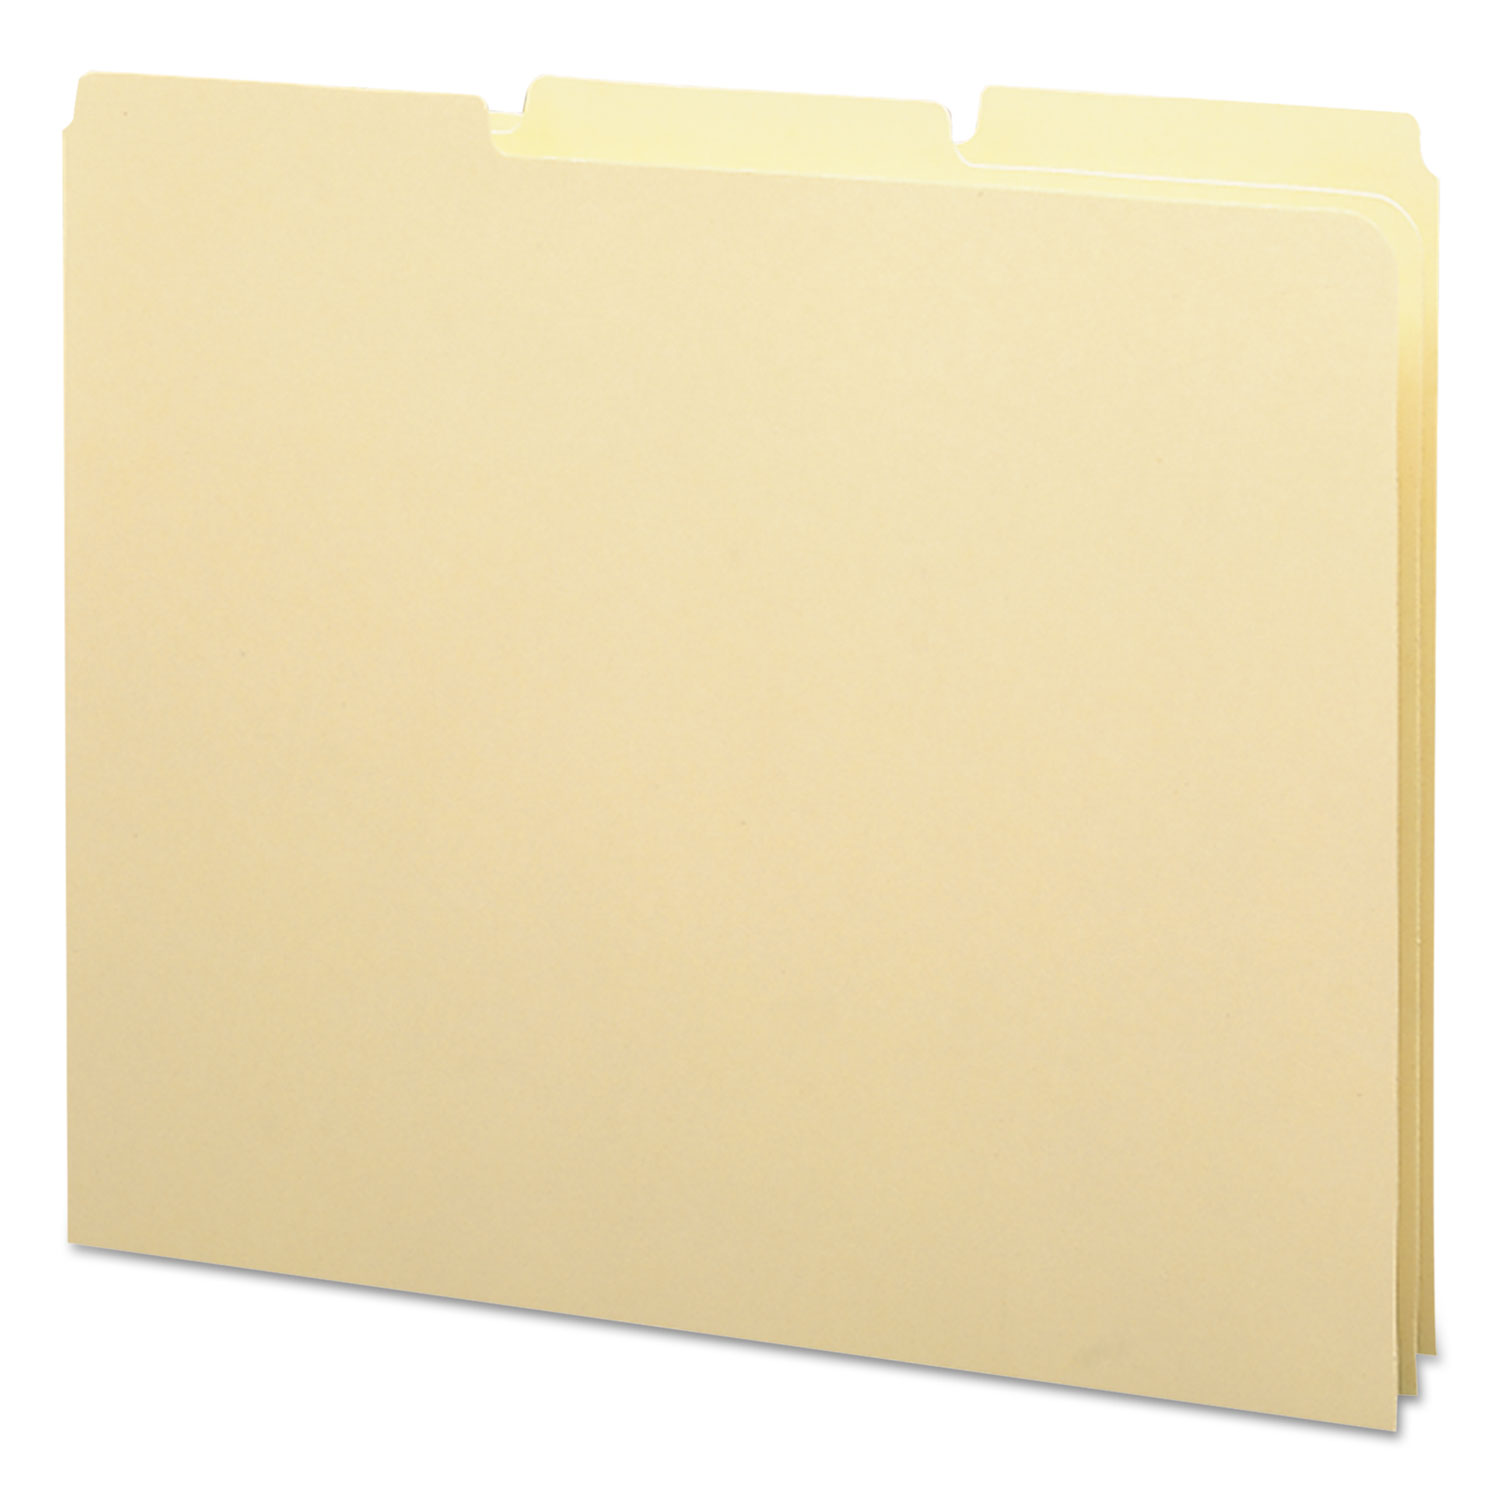  Smead 50134 Recycled Blank Top Tab File Guides, 1/3-Cut Top Tab, Blank, 8.5 x 11, Manila, 100/Box (SMD50134) 